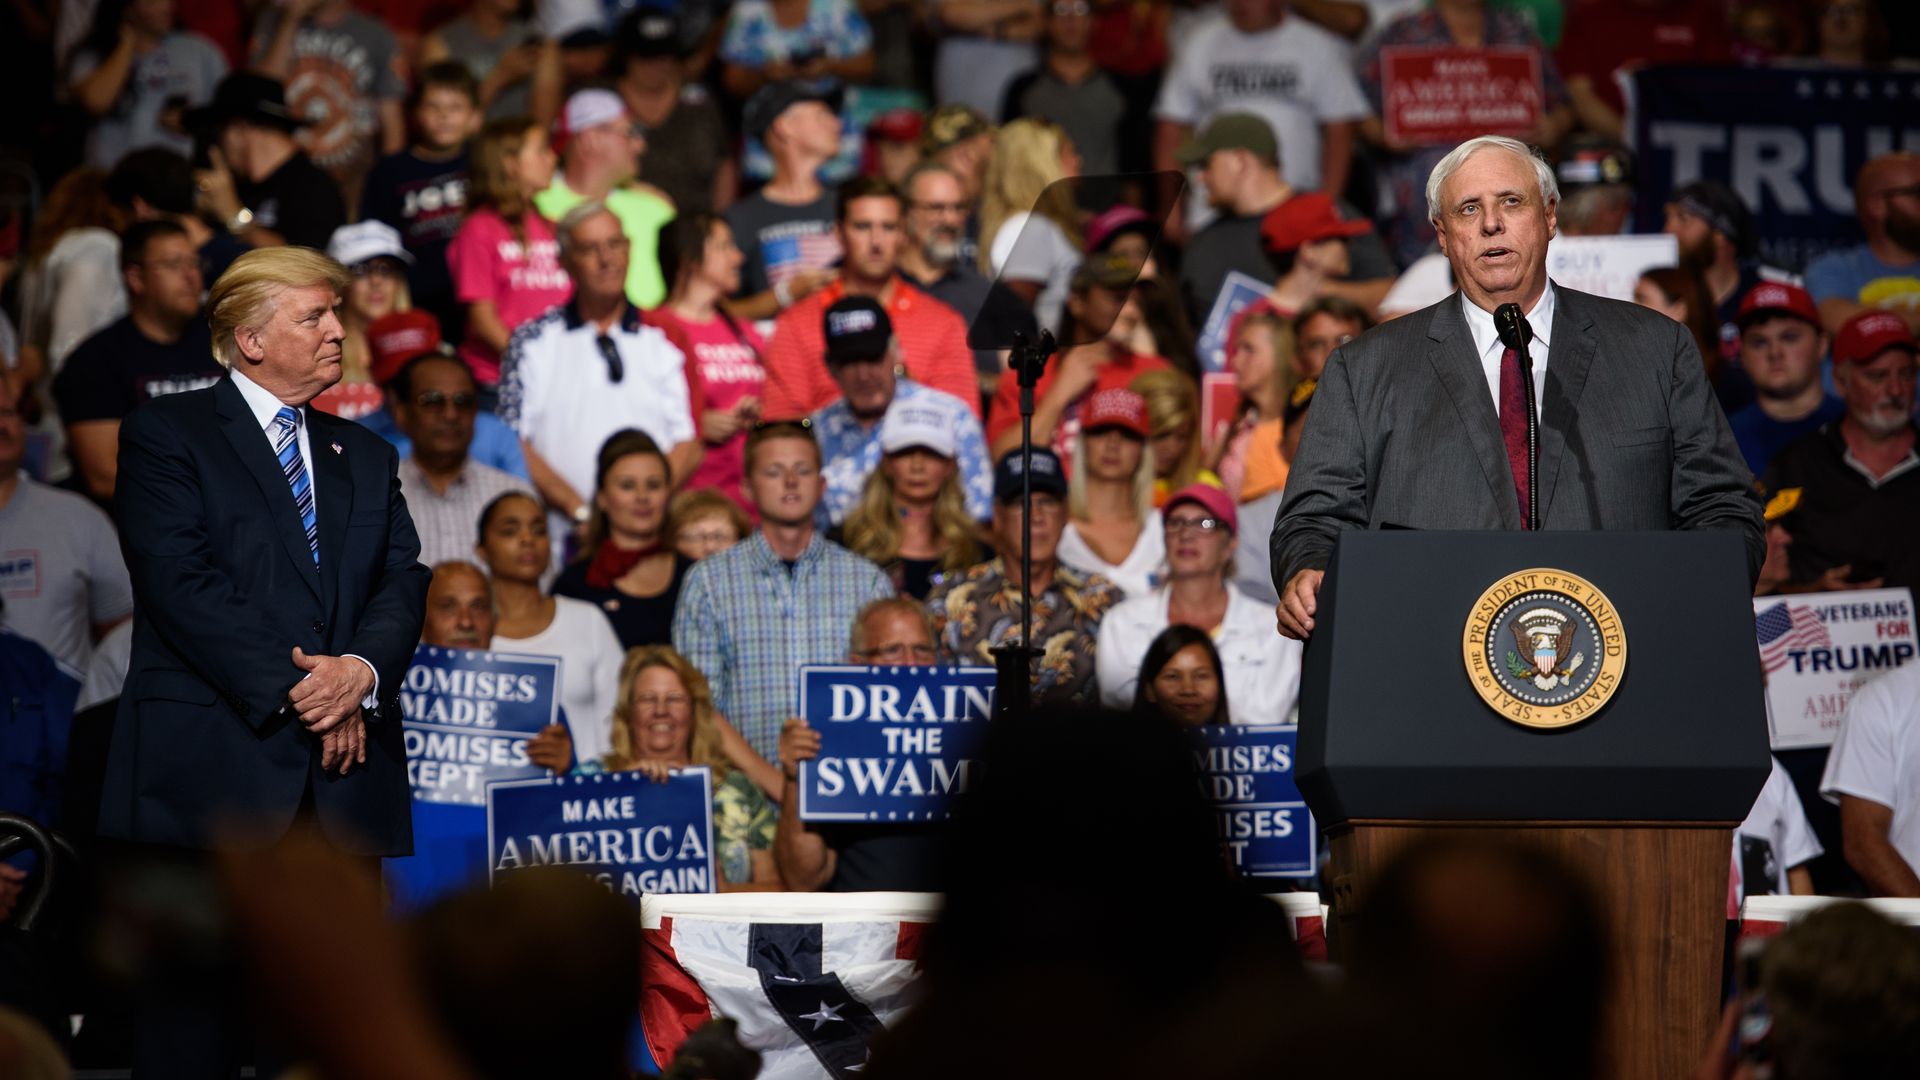 West Virginia Governor Jim Justice announces that he is switching parties to become a republican as President Donald J. Trump listens on at a campaign rally at the Big Sandy Superstore Arena on August 3, 2017 in Huntington, West Virginia.